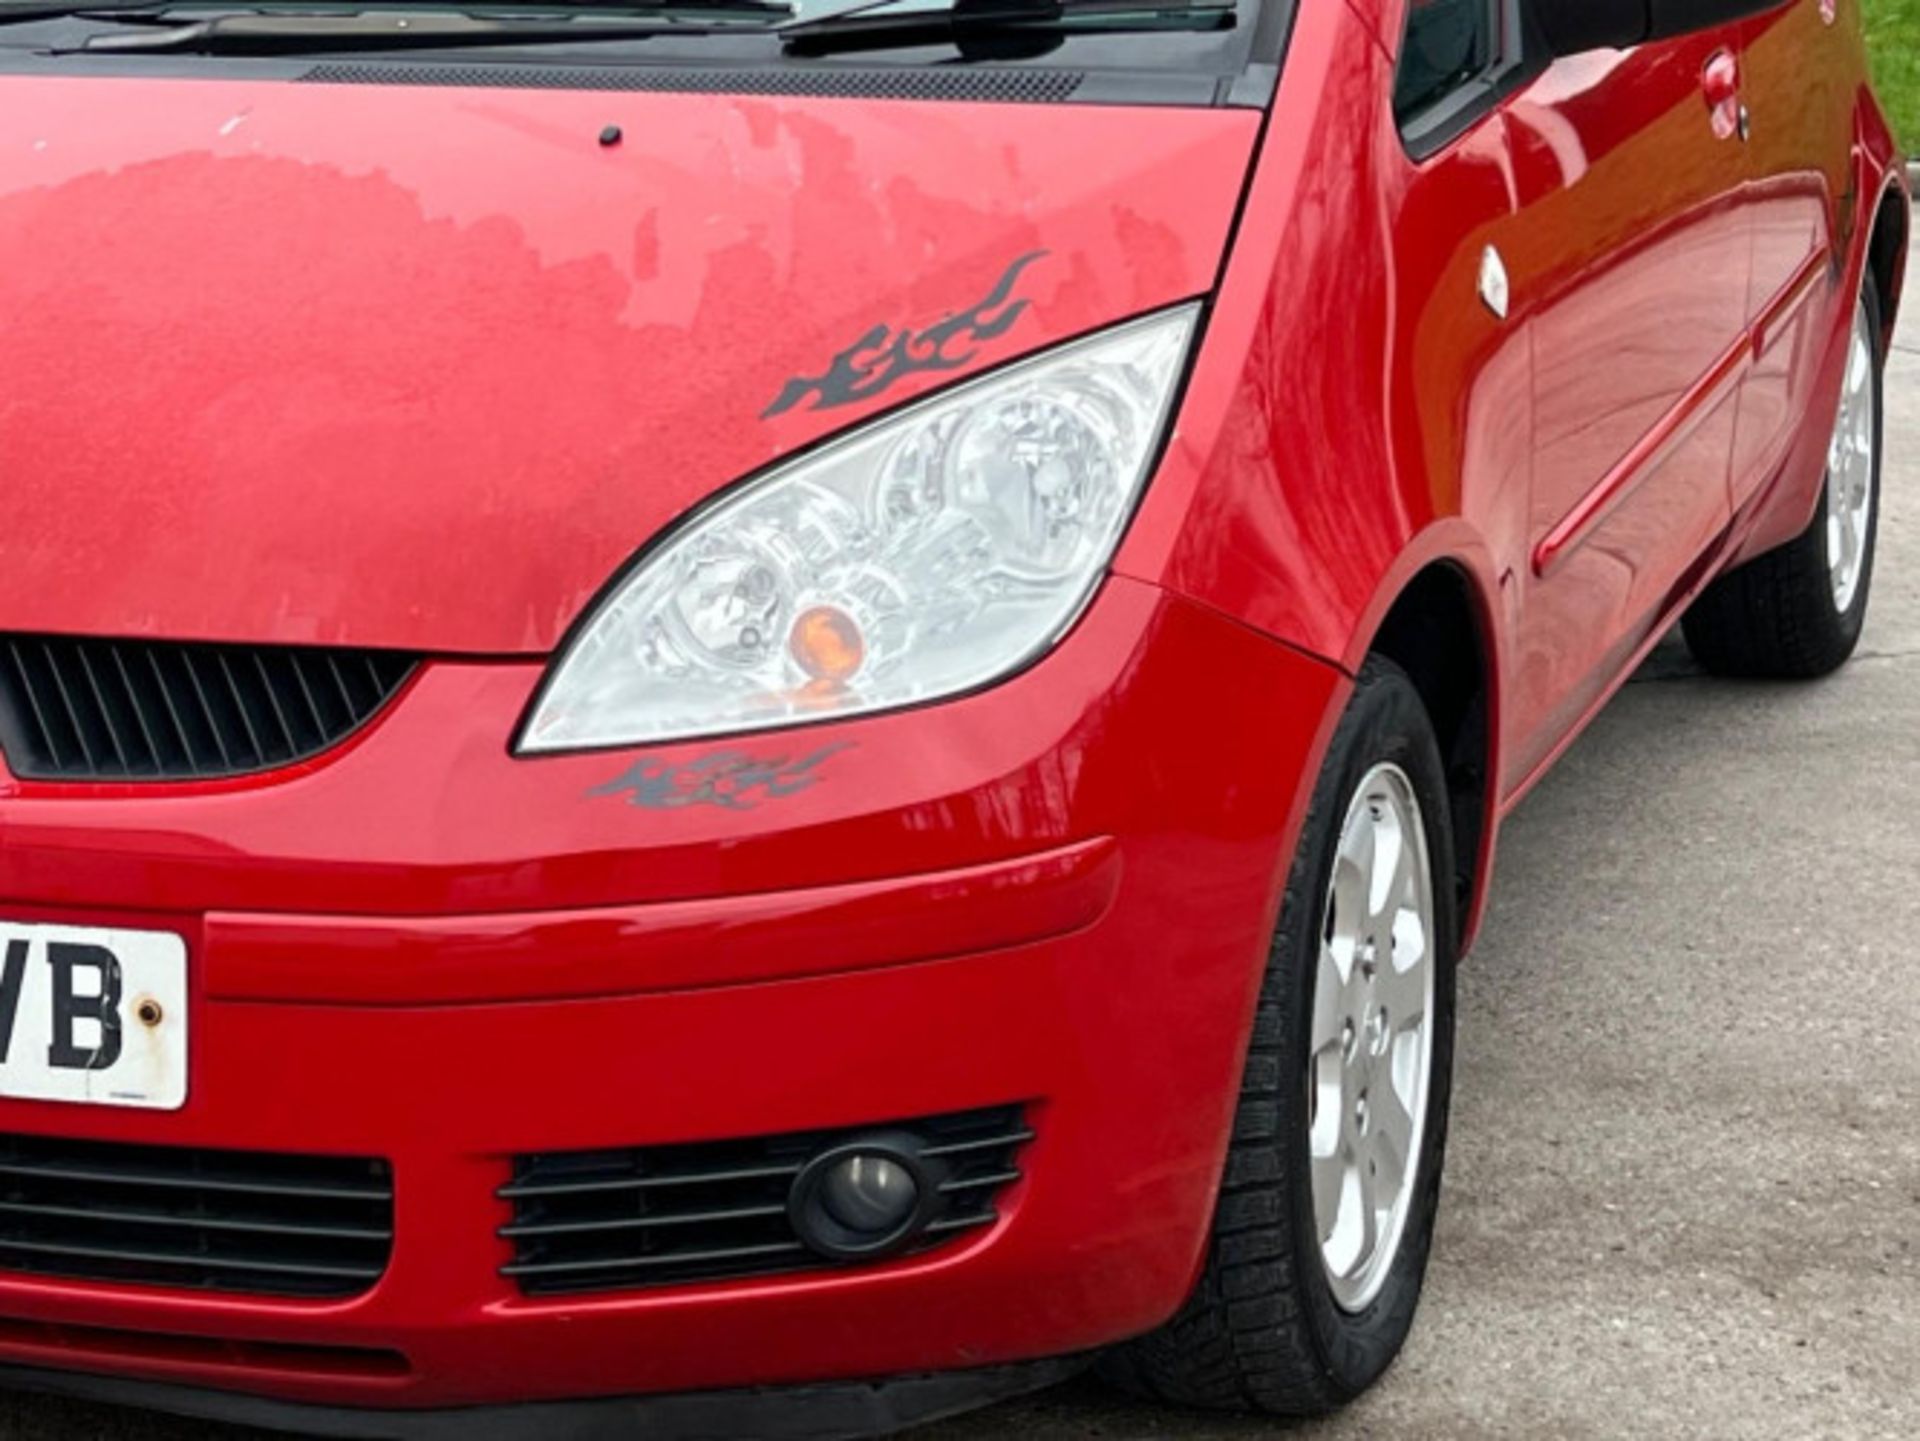 2007 MITSUBISHI COLT 1.5 DI-D DIESEL AUTOMATIC >>--NO VAT ON HAMMER--<< - Image 168 of 191